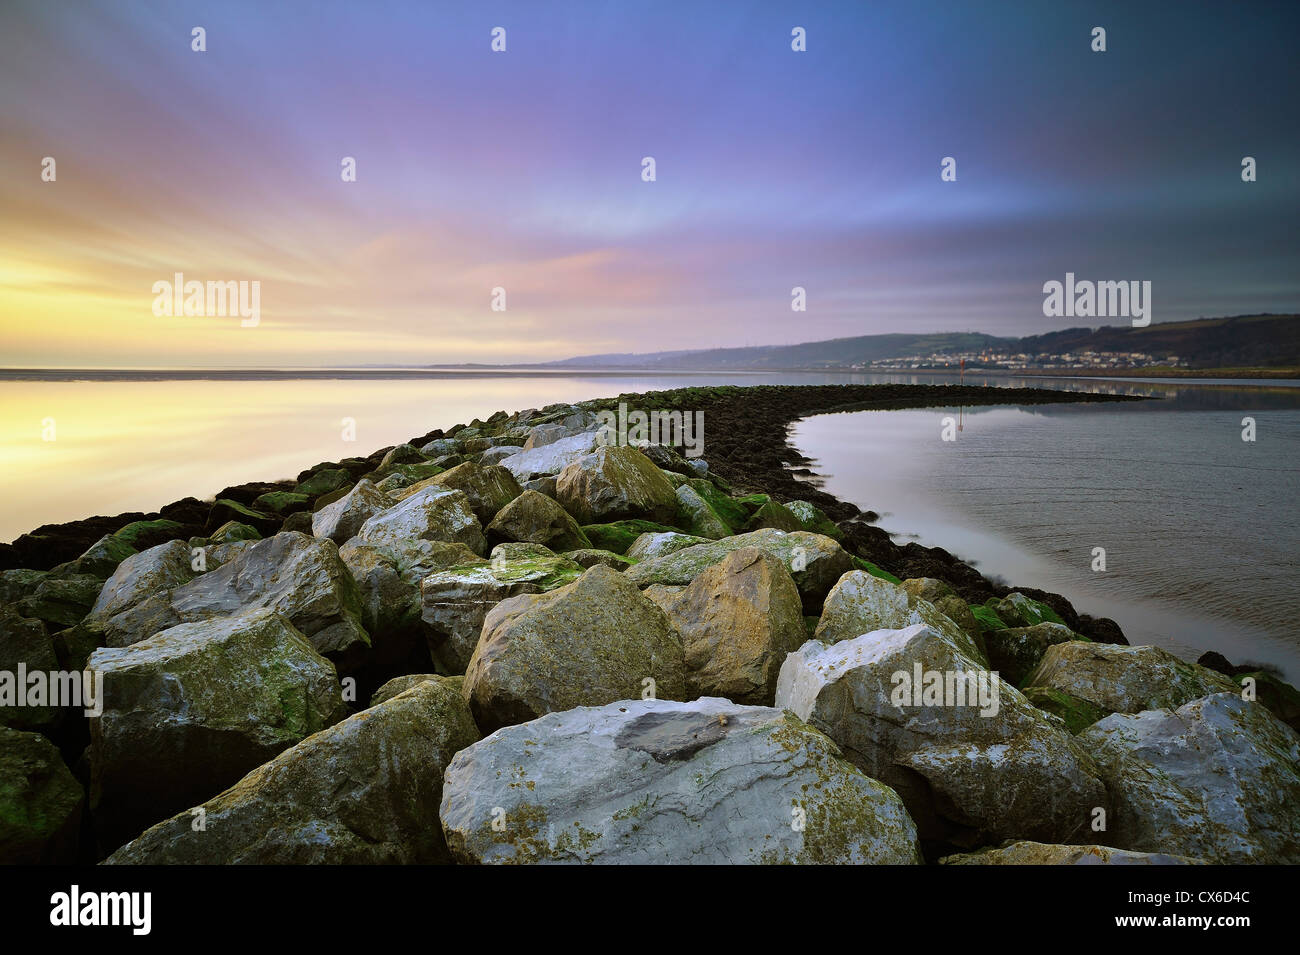 Stone sea defenses at Llanelli beach with Pwll in the distance taken with a long exposure. Stock Photo